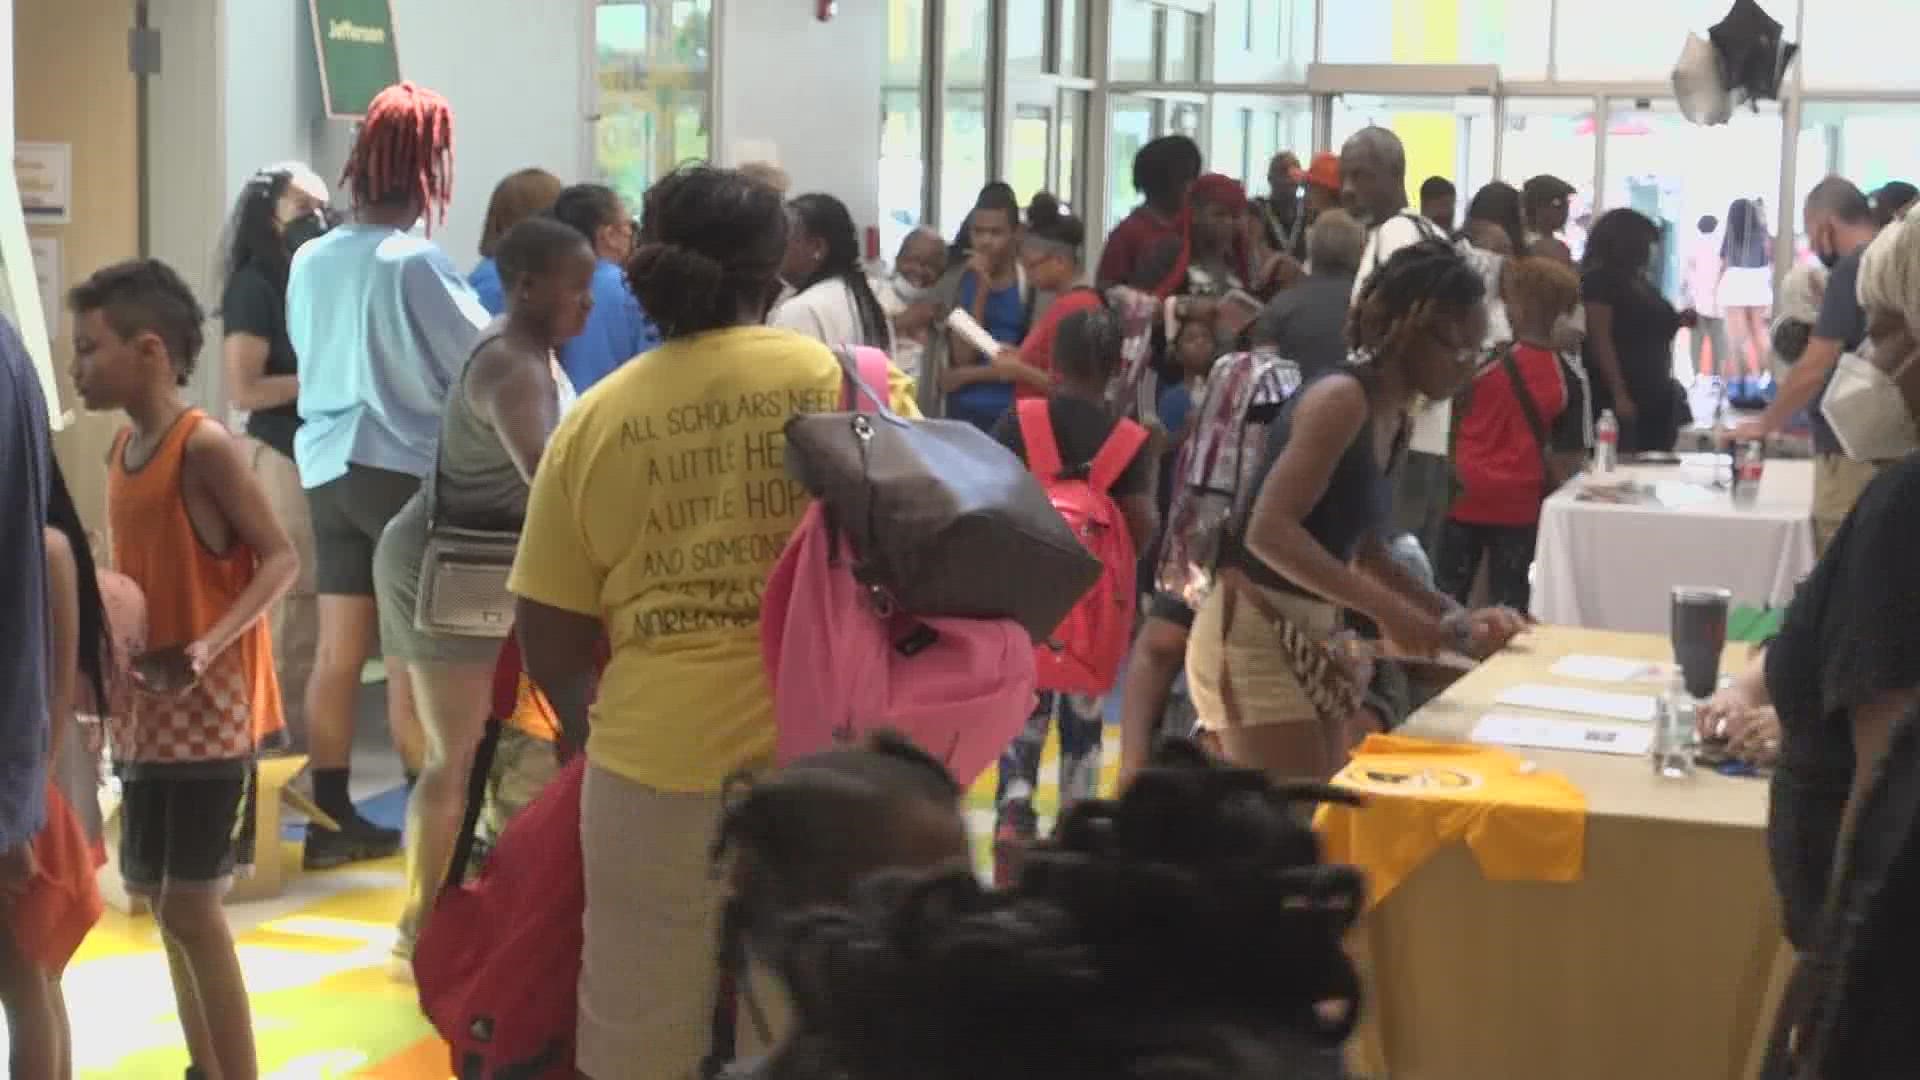 Hundreds of families prepared for the upcoming school year at the Beyond the Backpack event in Normandy. There were free physicals, immunizations, uniforms and more.